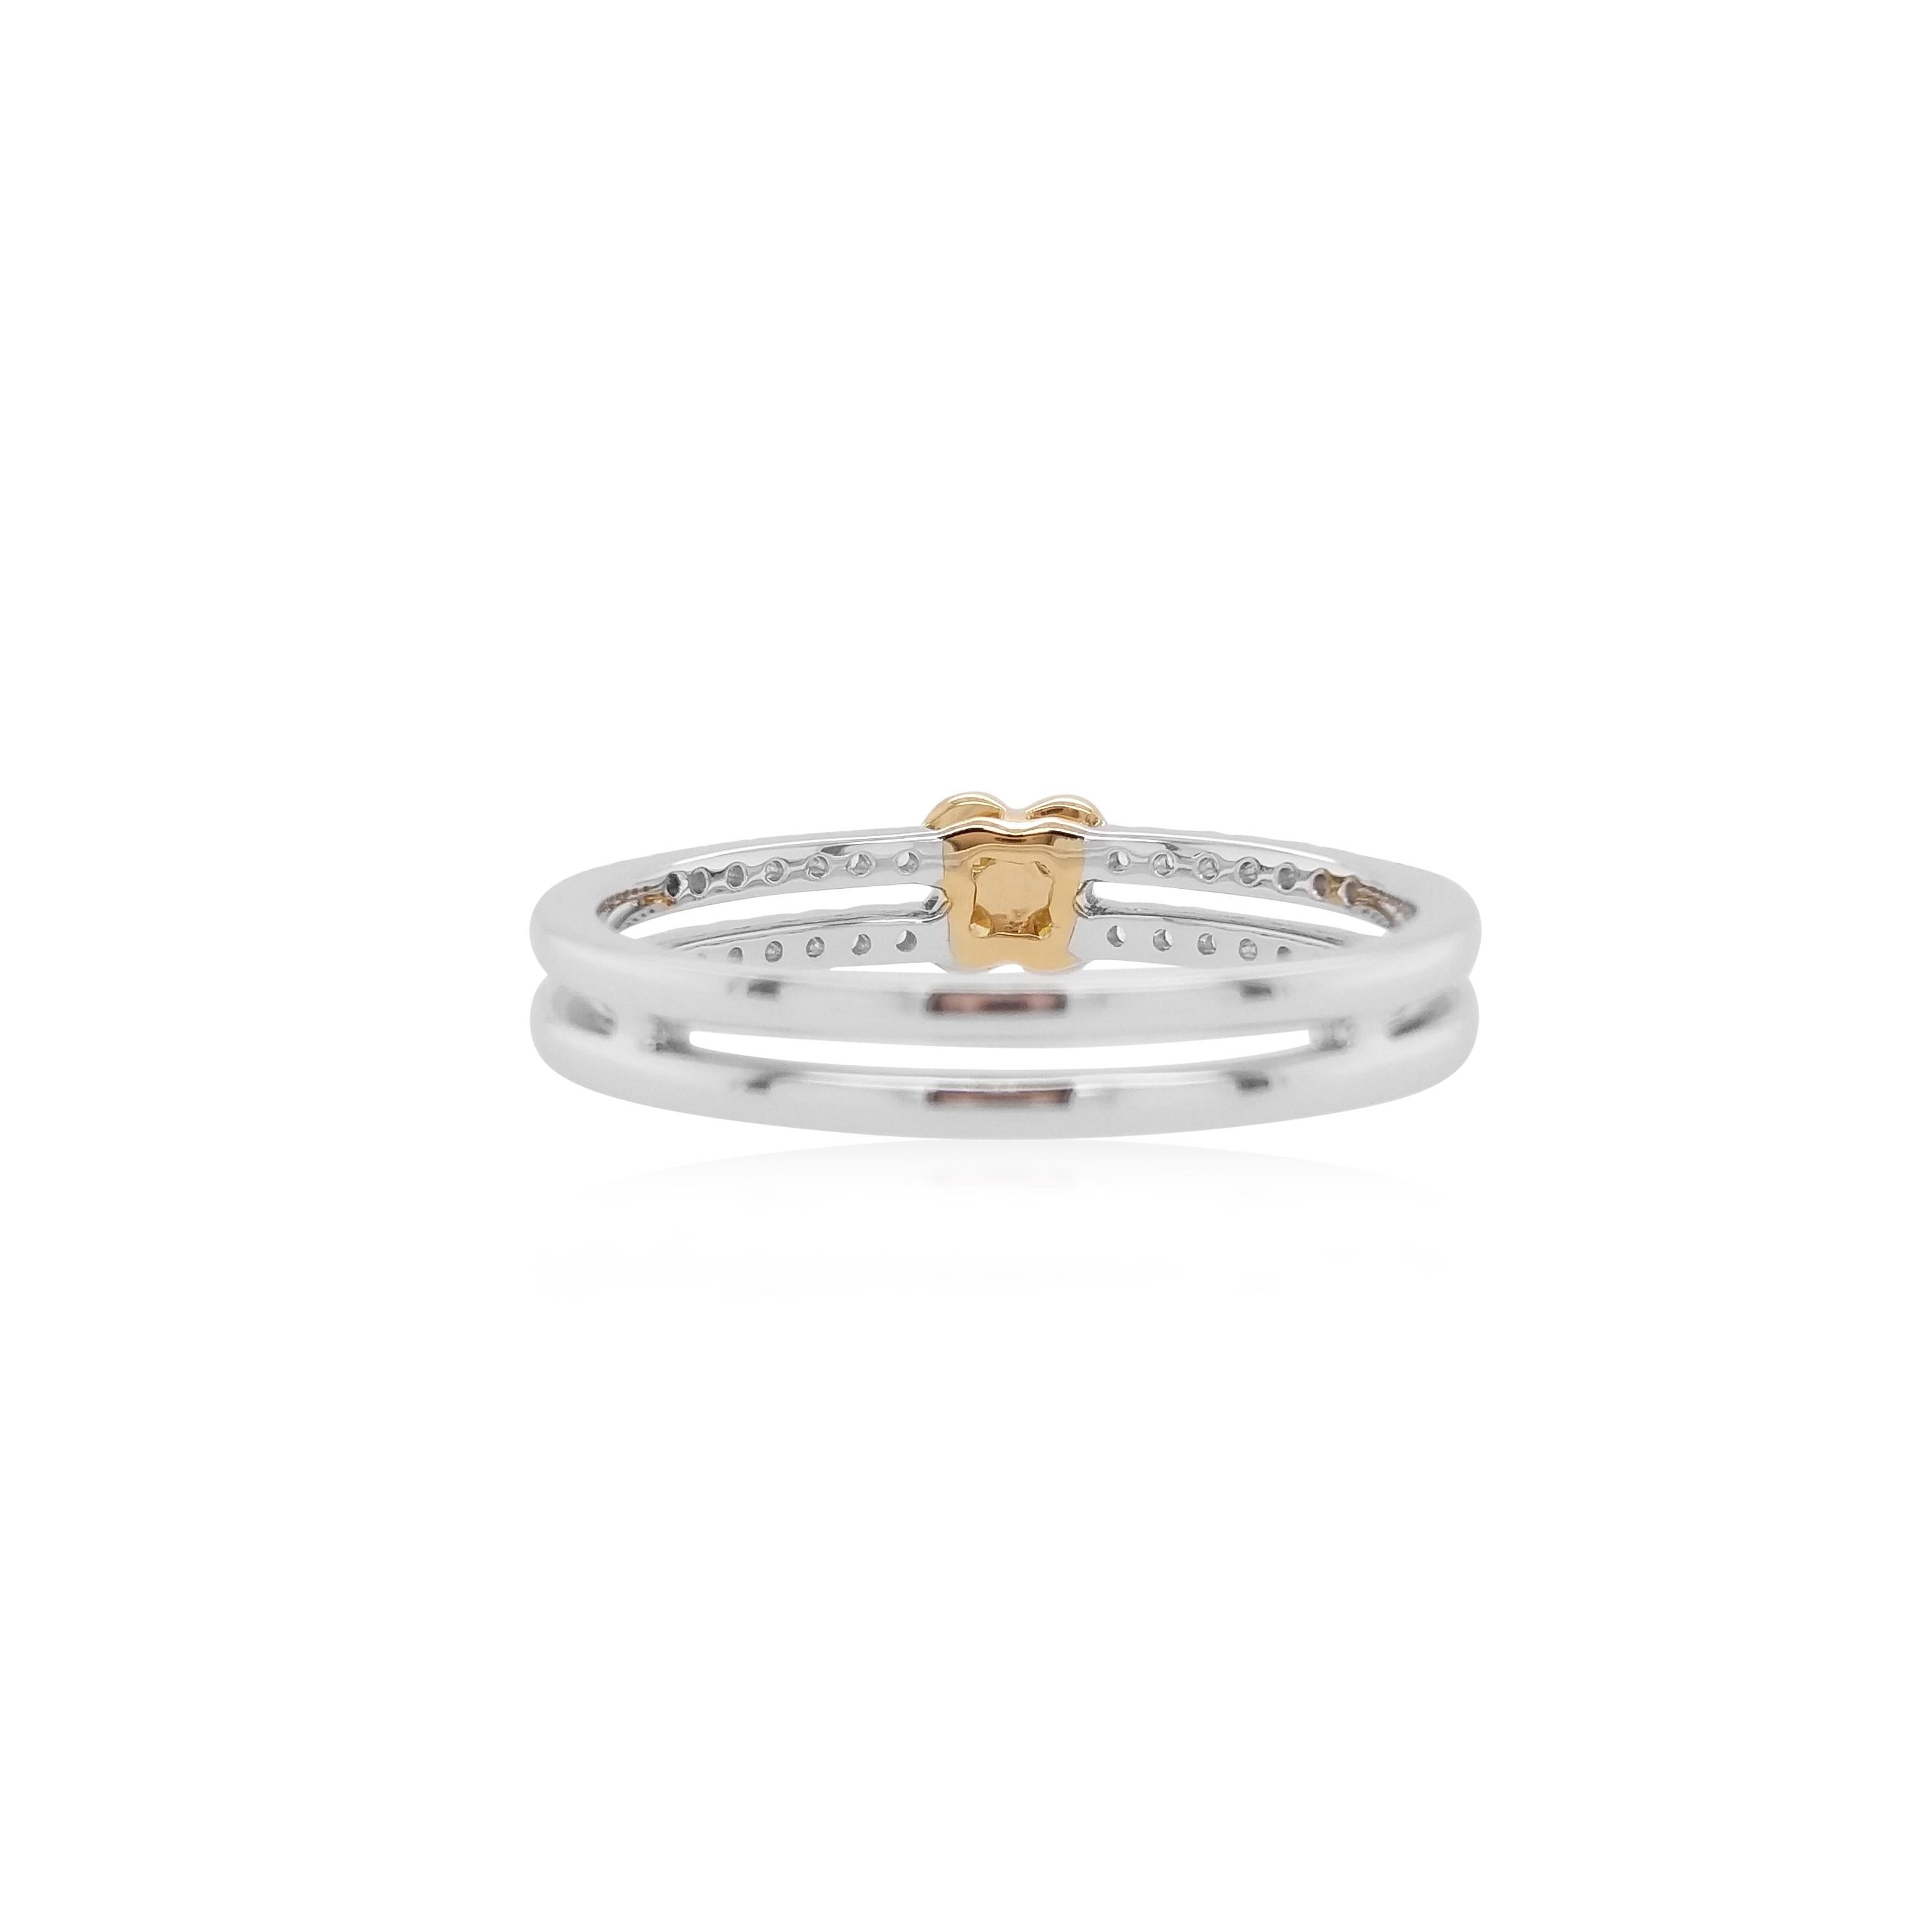 Contemporary Round Brilliant Cut Yellow Diamond and White Diamond Band Ring made in 18K Gold For Sale